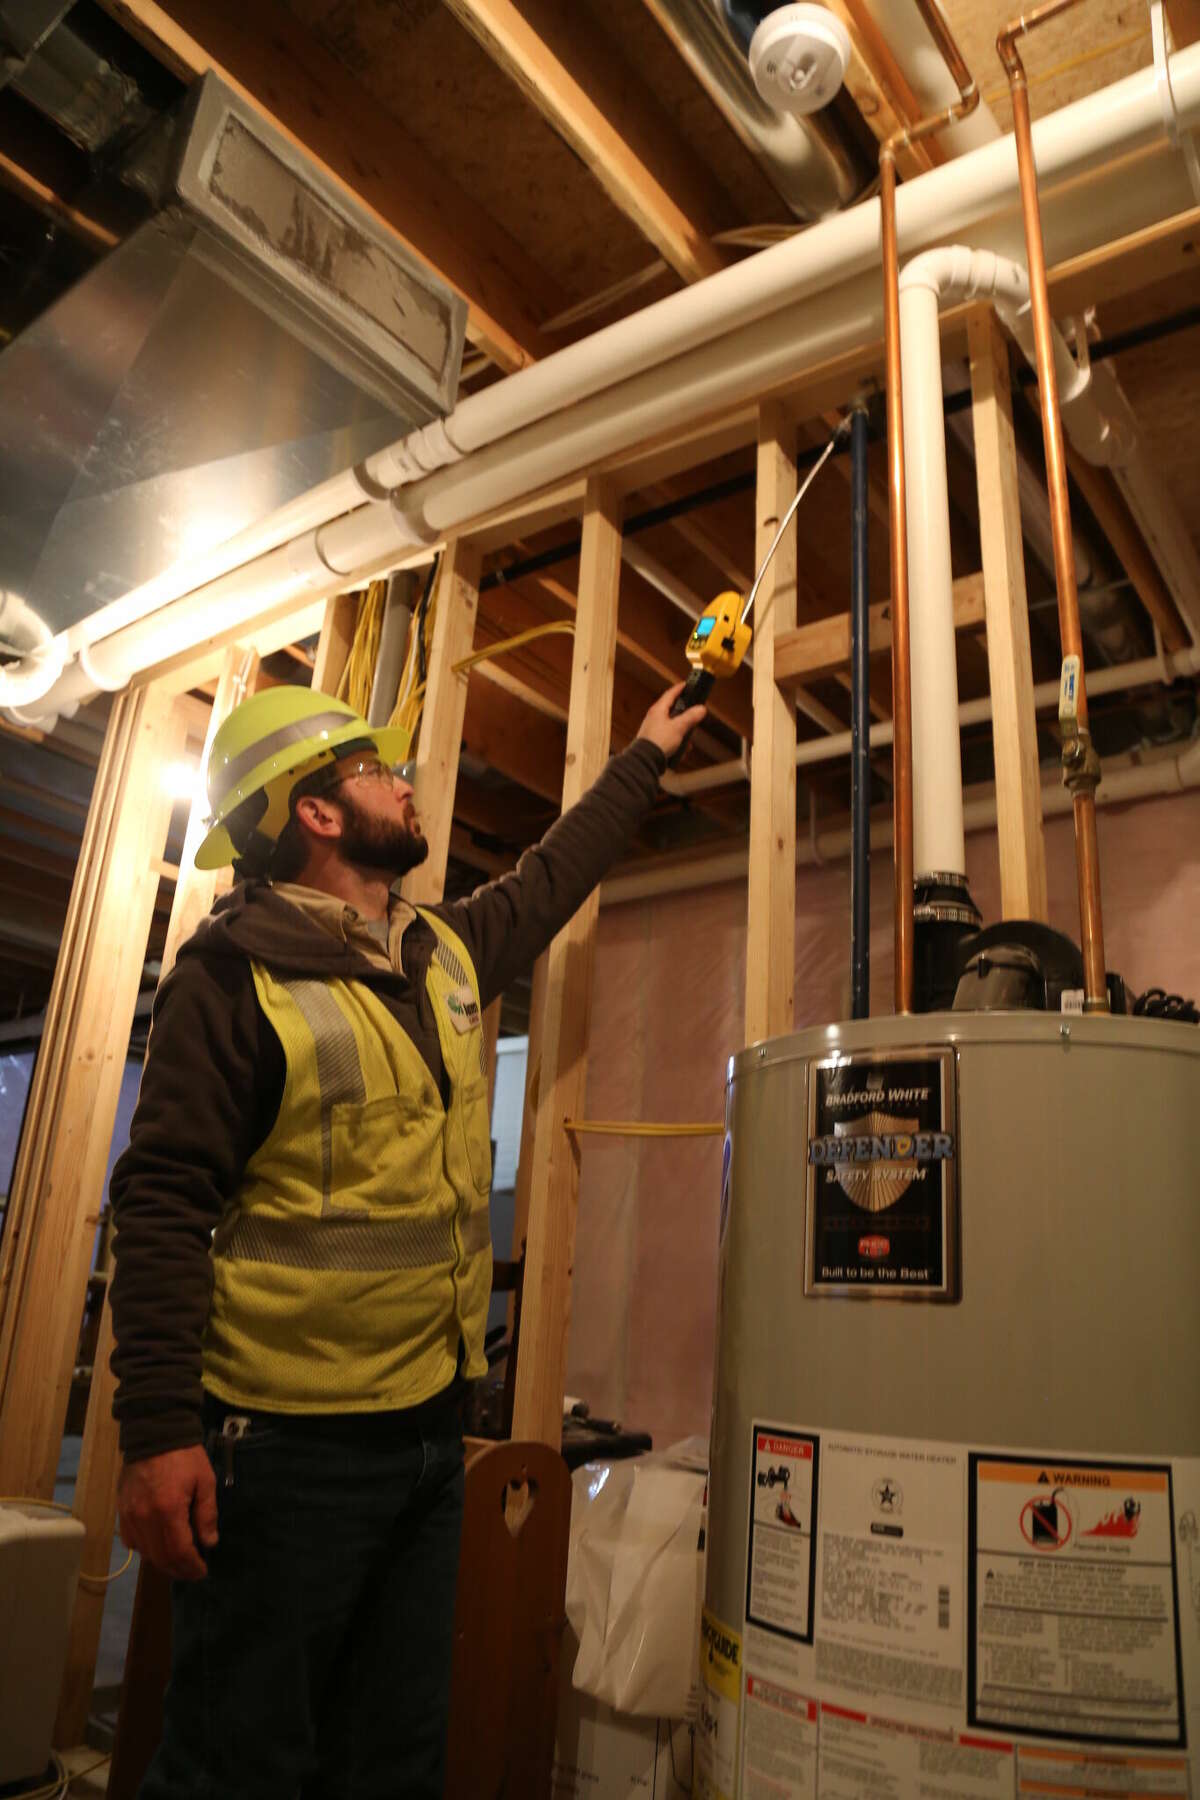 An Ameren Illinois natural gas journeyman inspects a customer's water heater for any gas leaks.